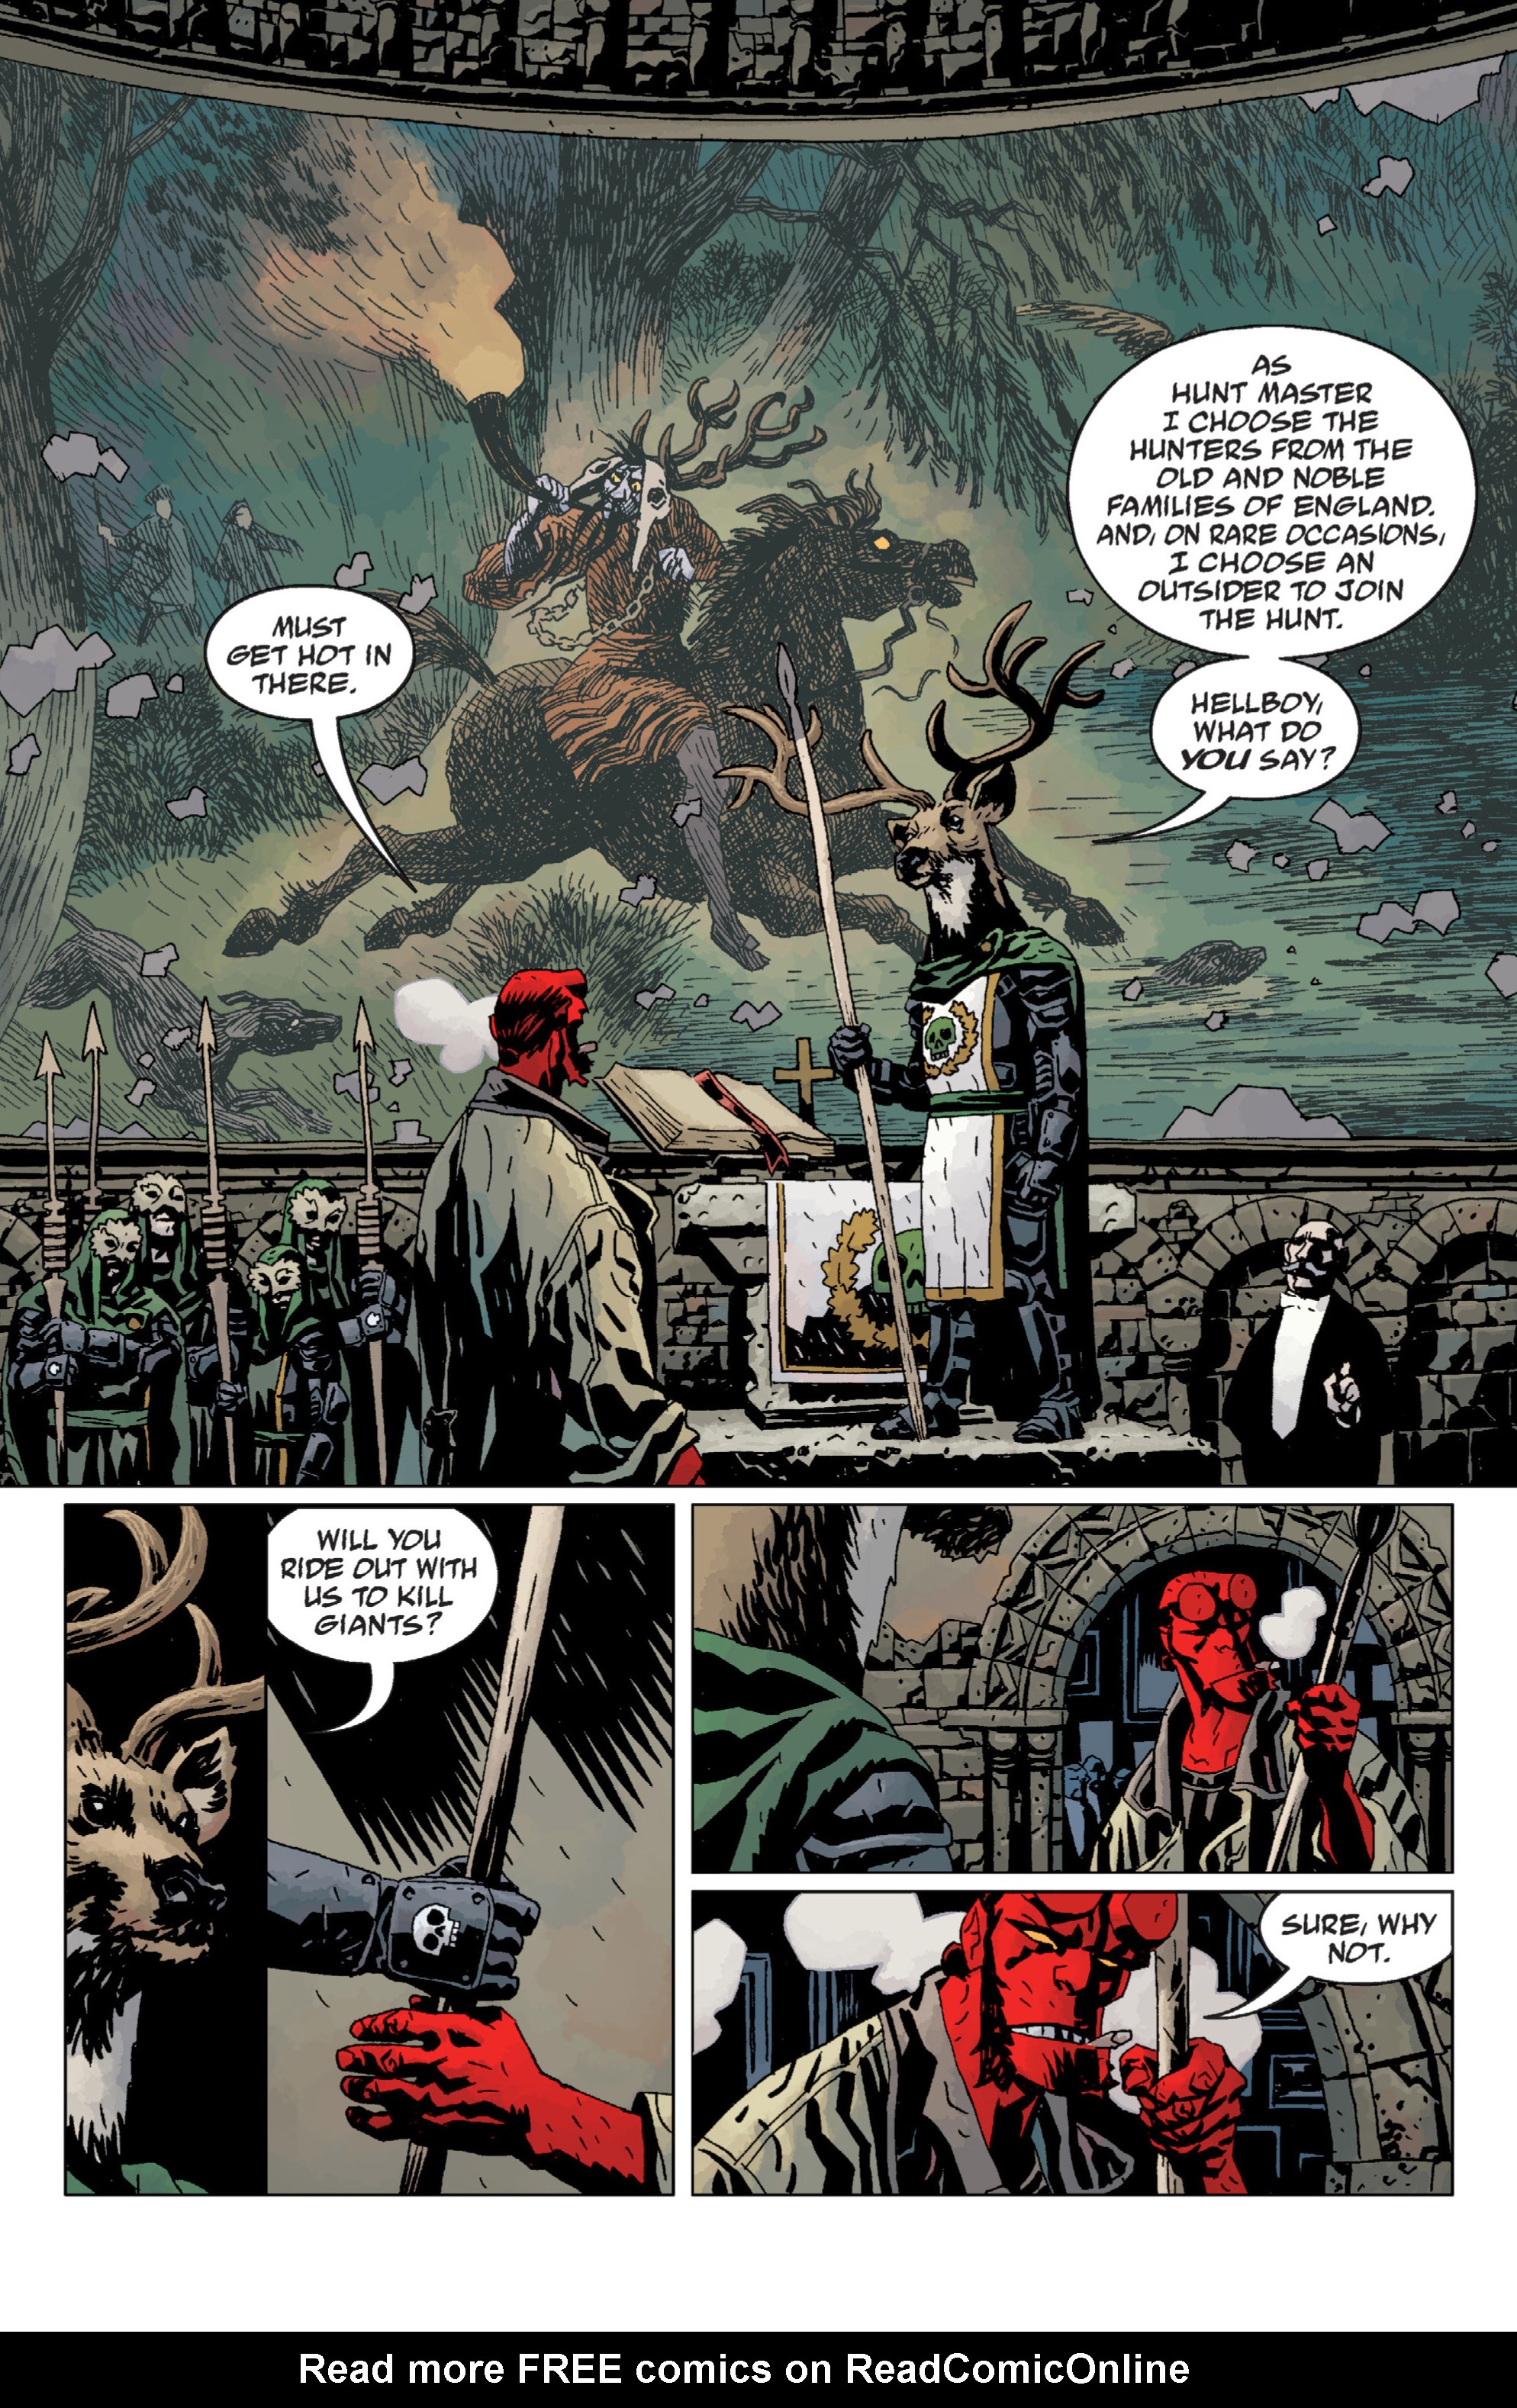 Read online Hellboy comic -  Issue #9 - 24